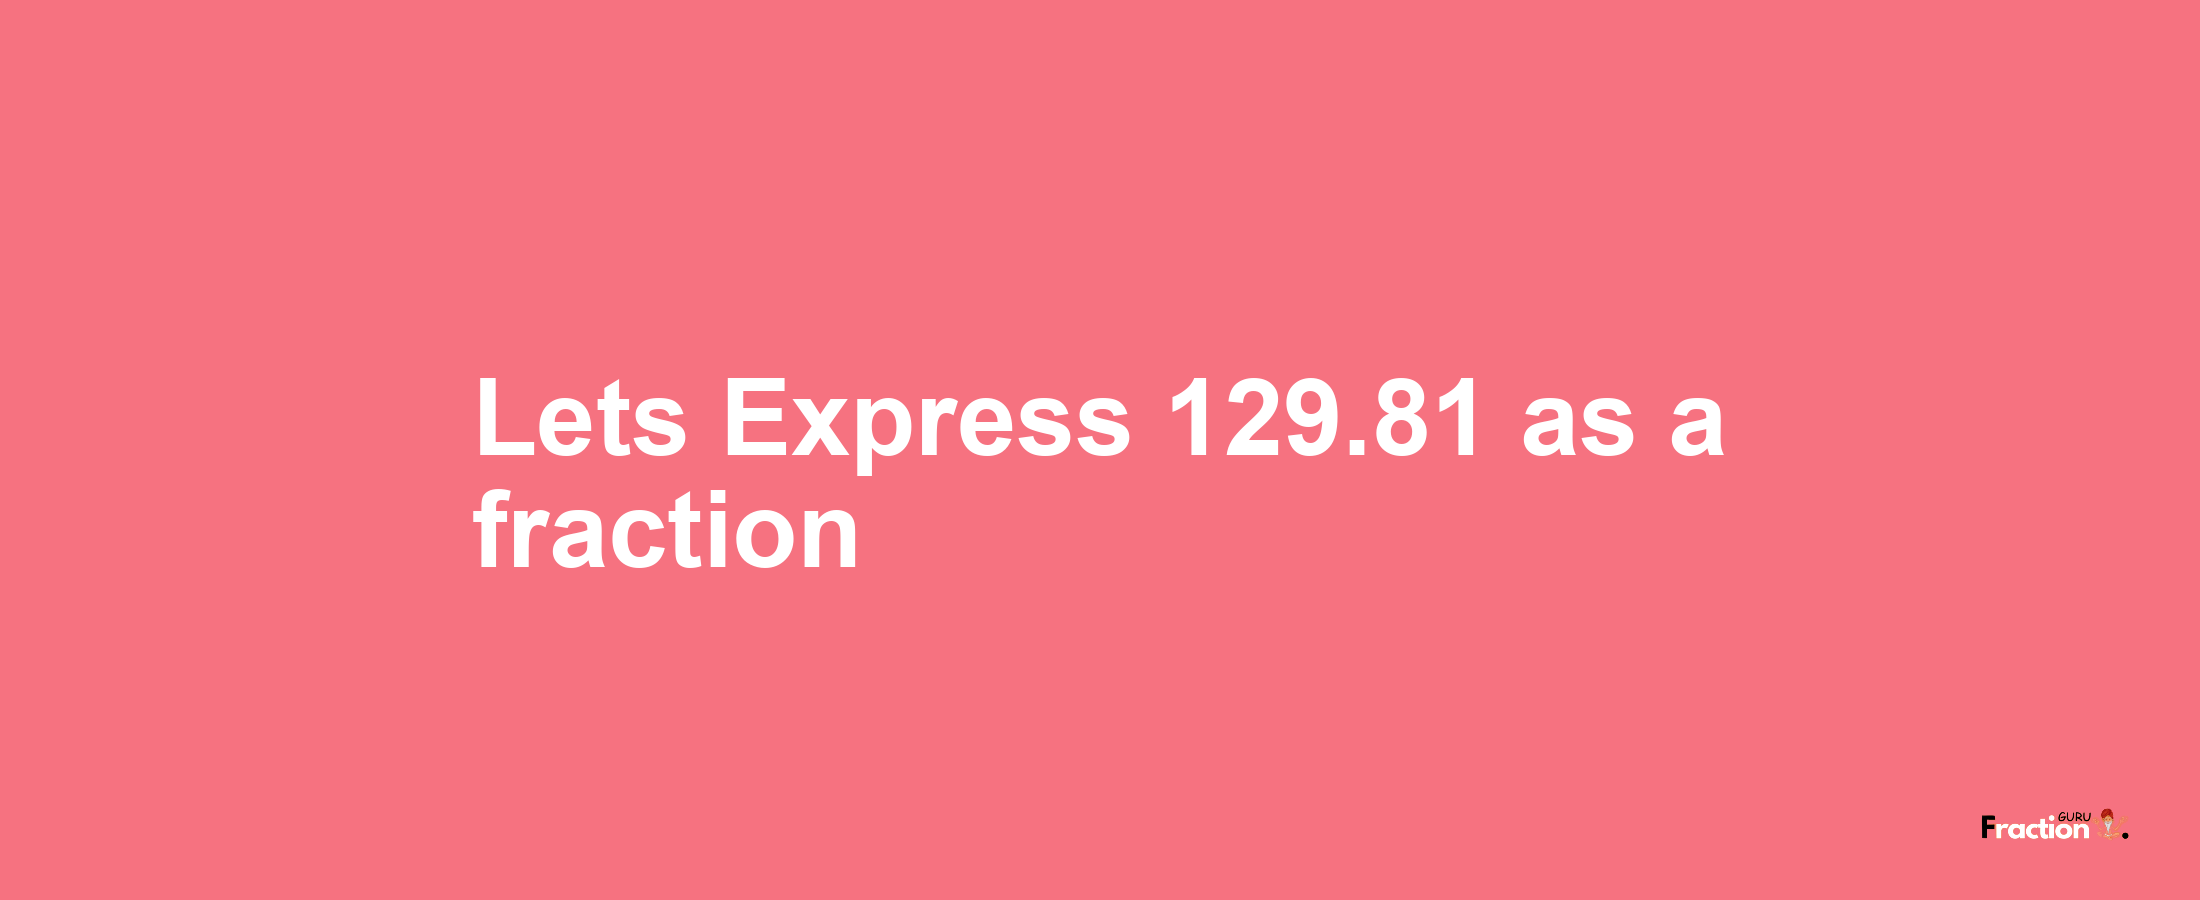 Lets Express 129.81 as afraction